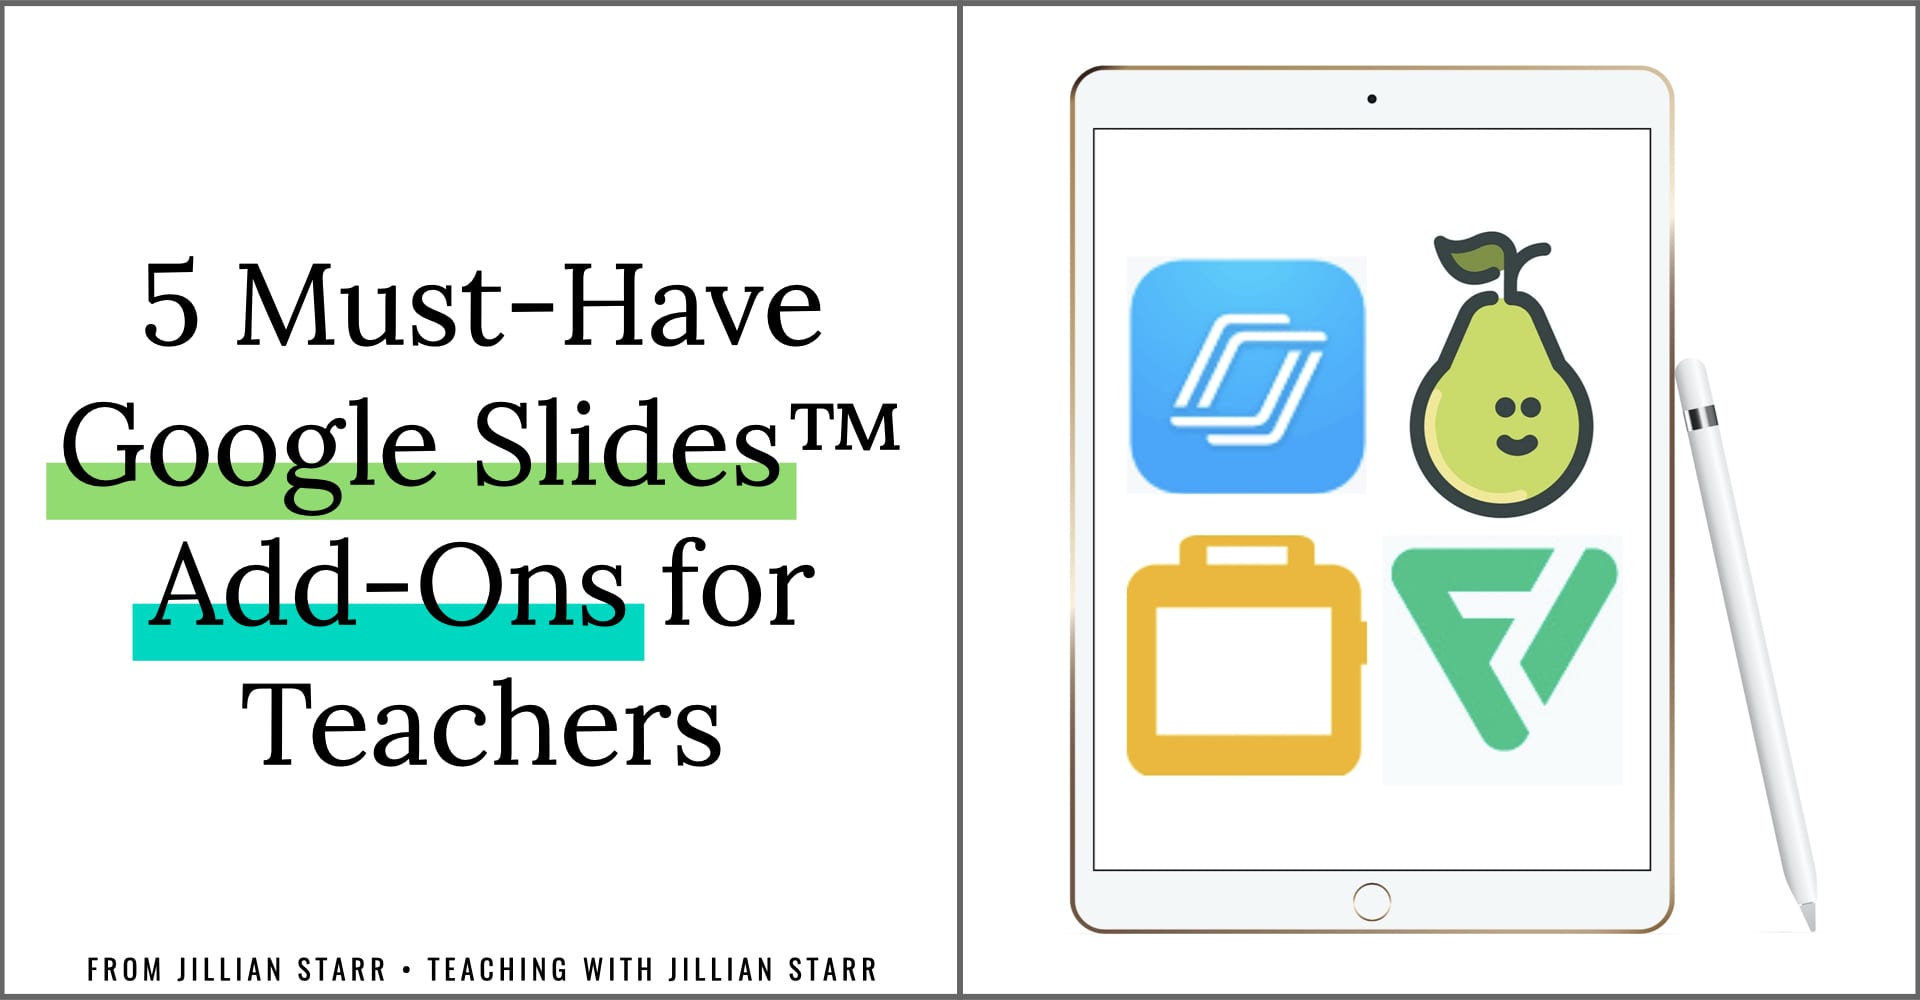 Are you using Google Slides™ this year? I'm excited to share with you five must-have Google Slides™ add-ons to support your virtual teaching this year!